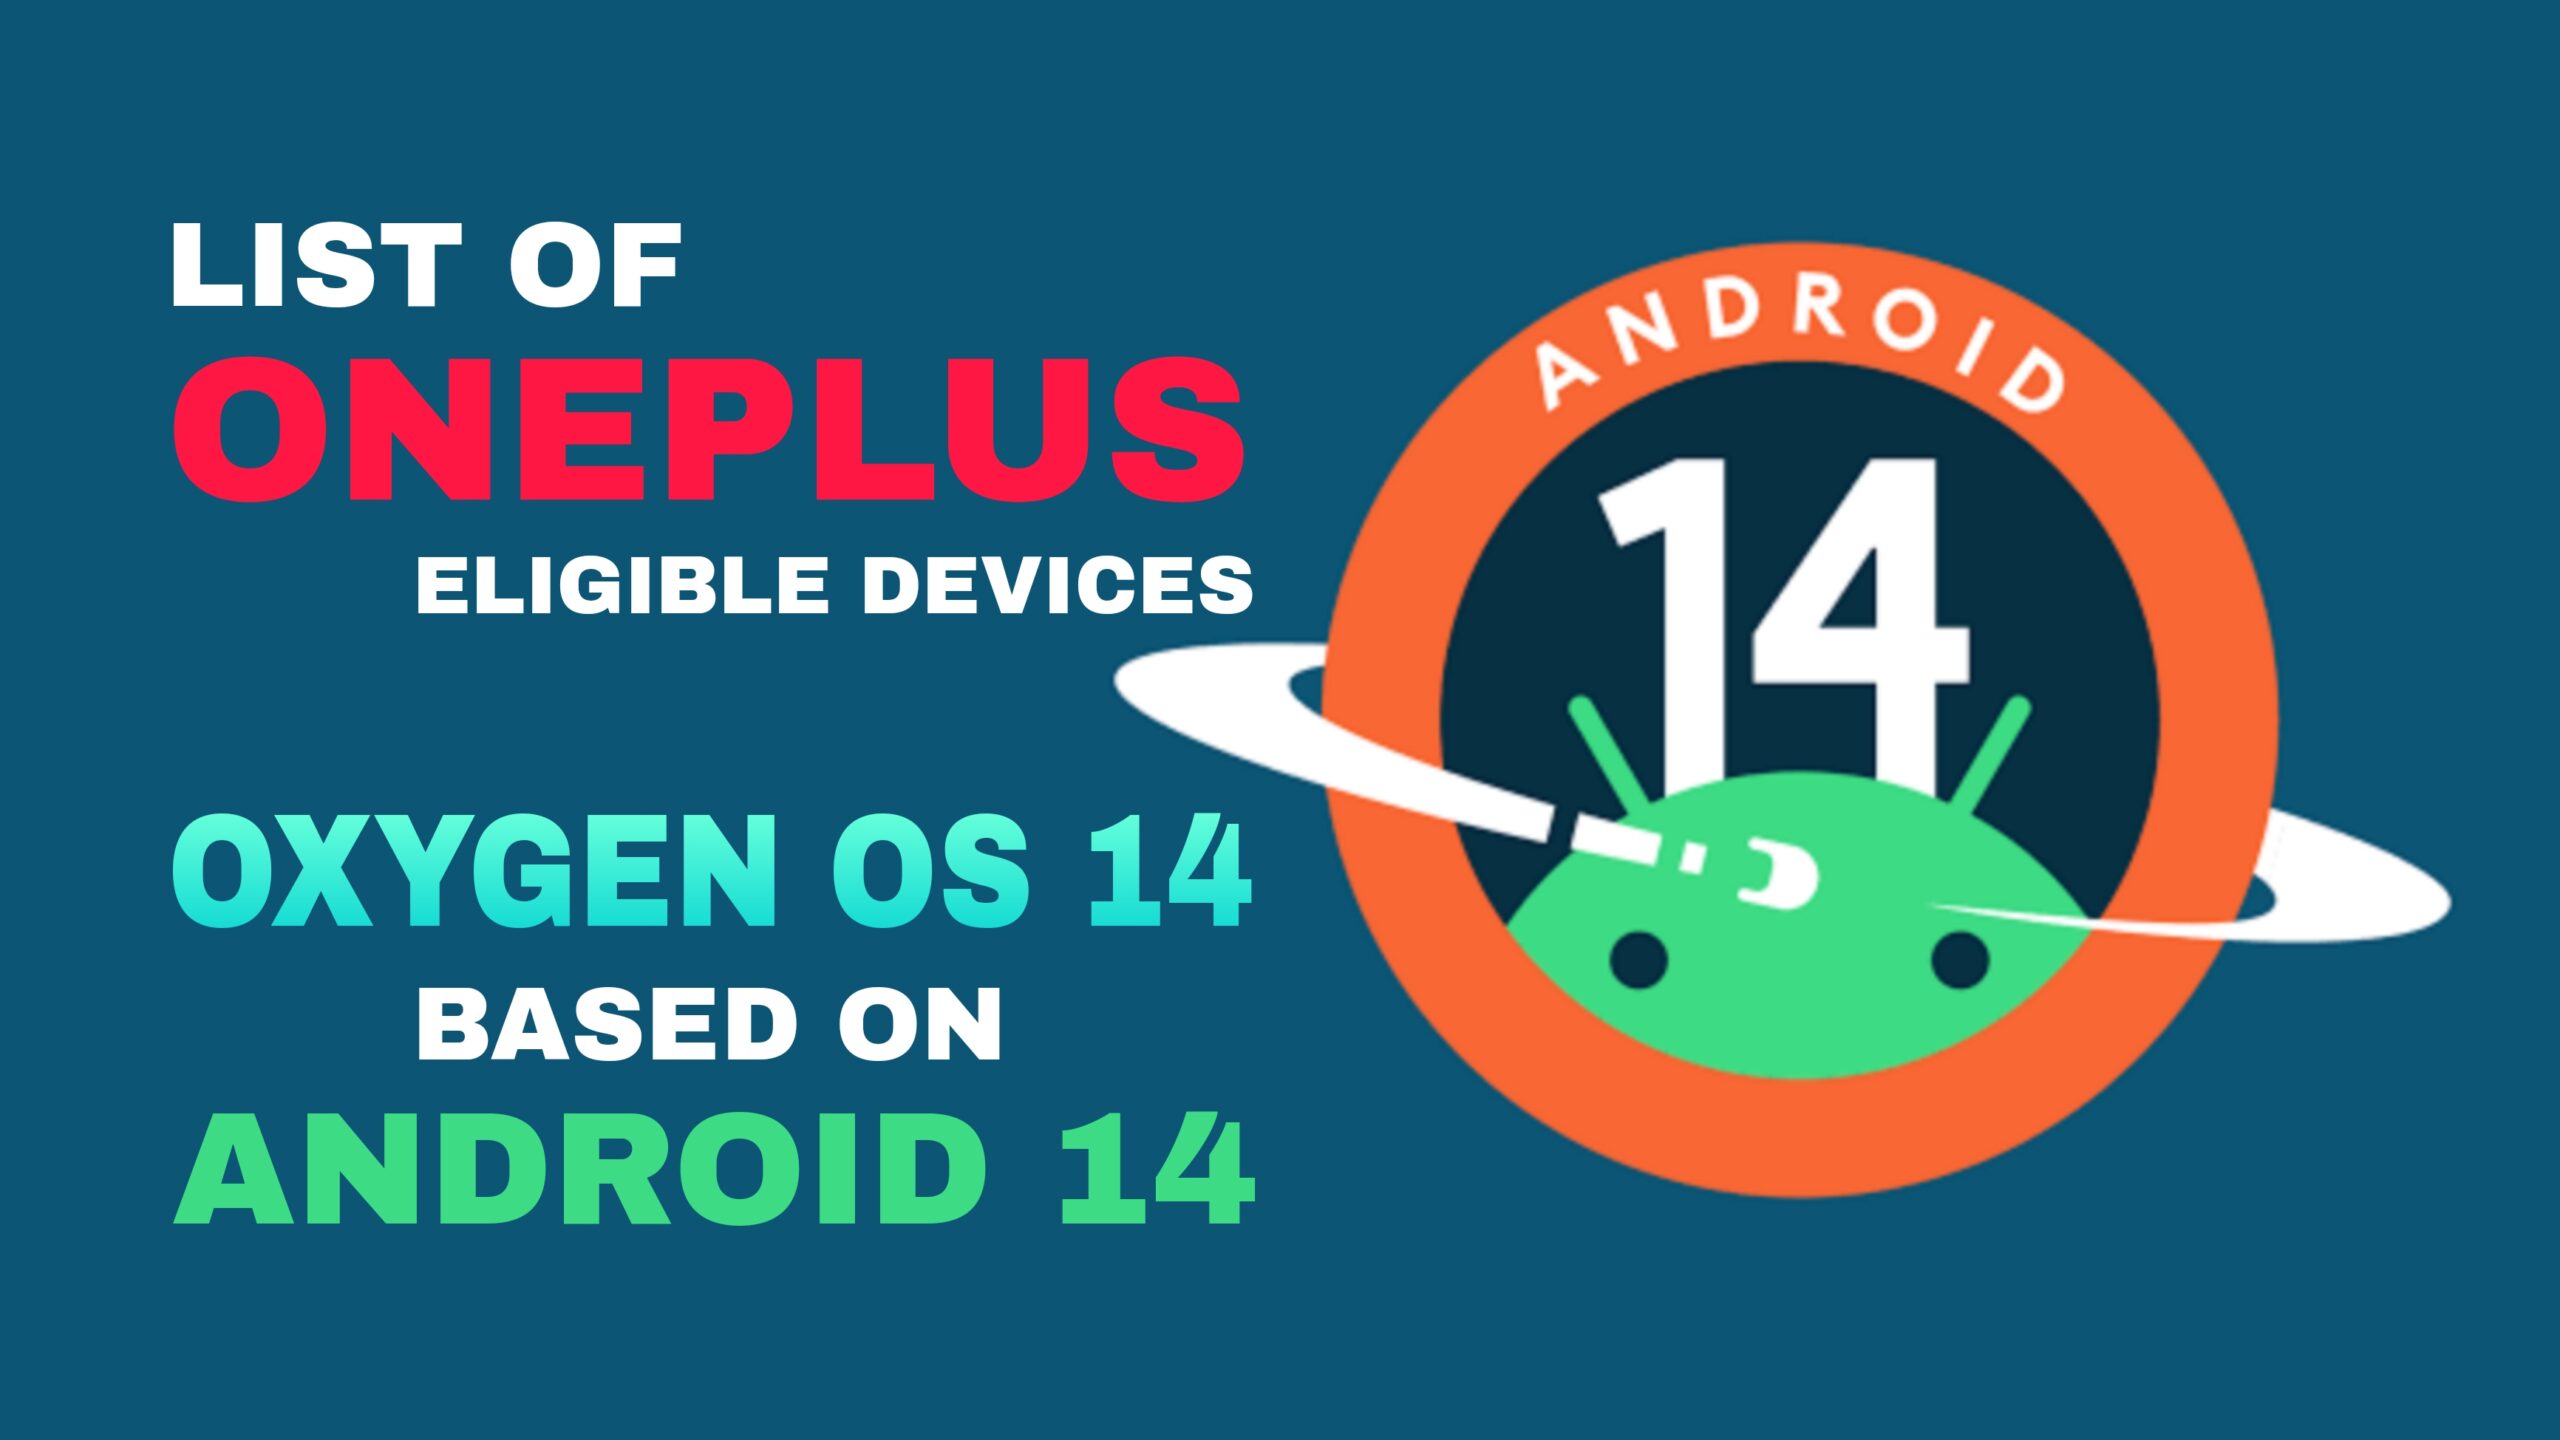 list of oneplus smartphones eligible for oxygenos 14 based on android 14 - the go android